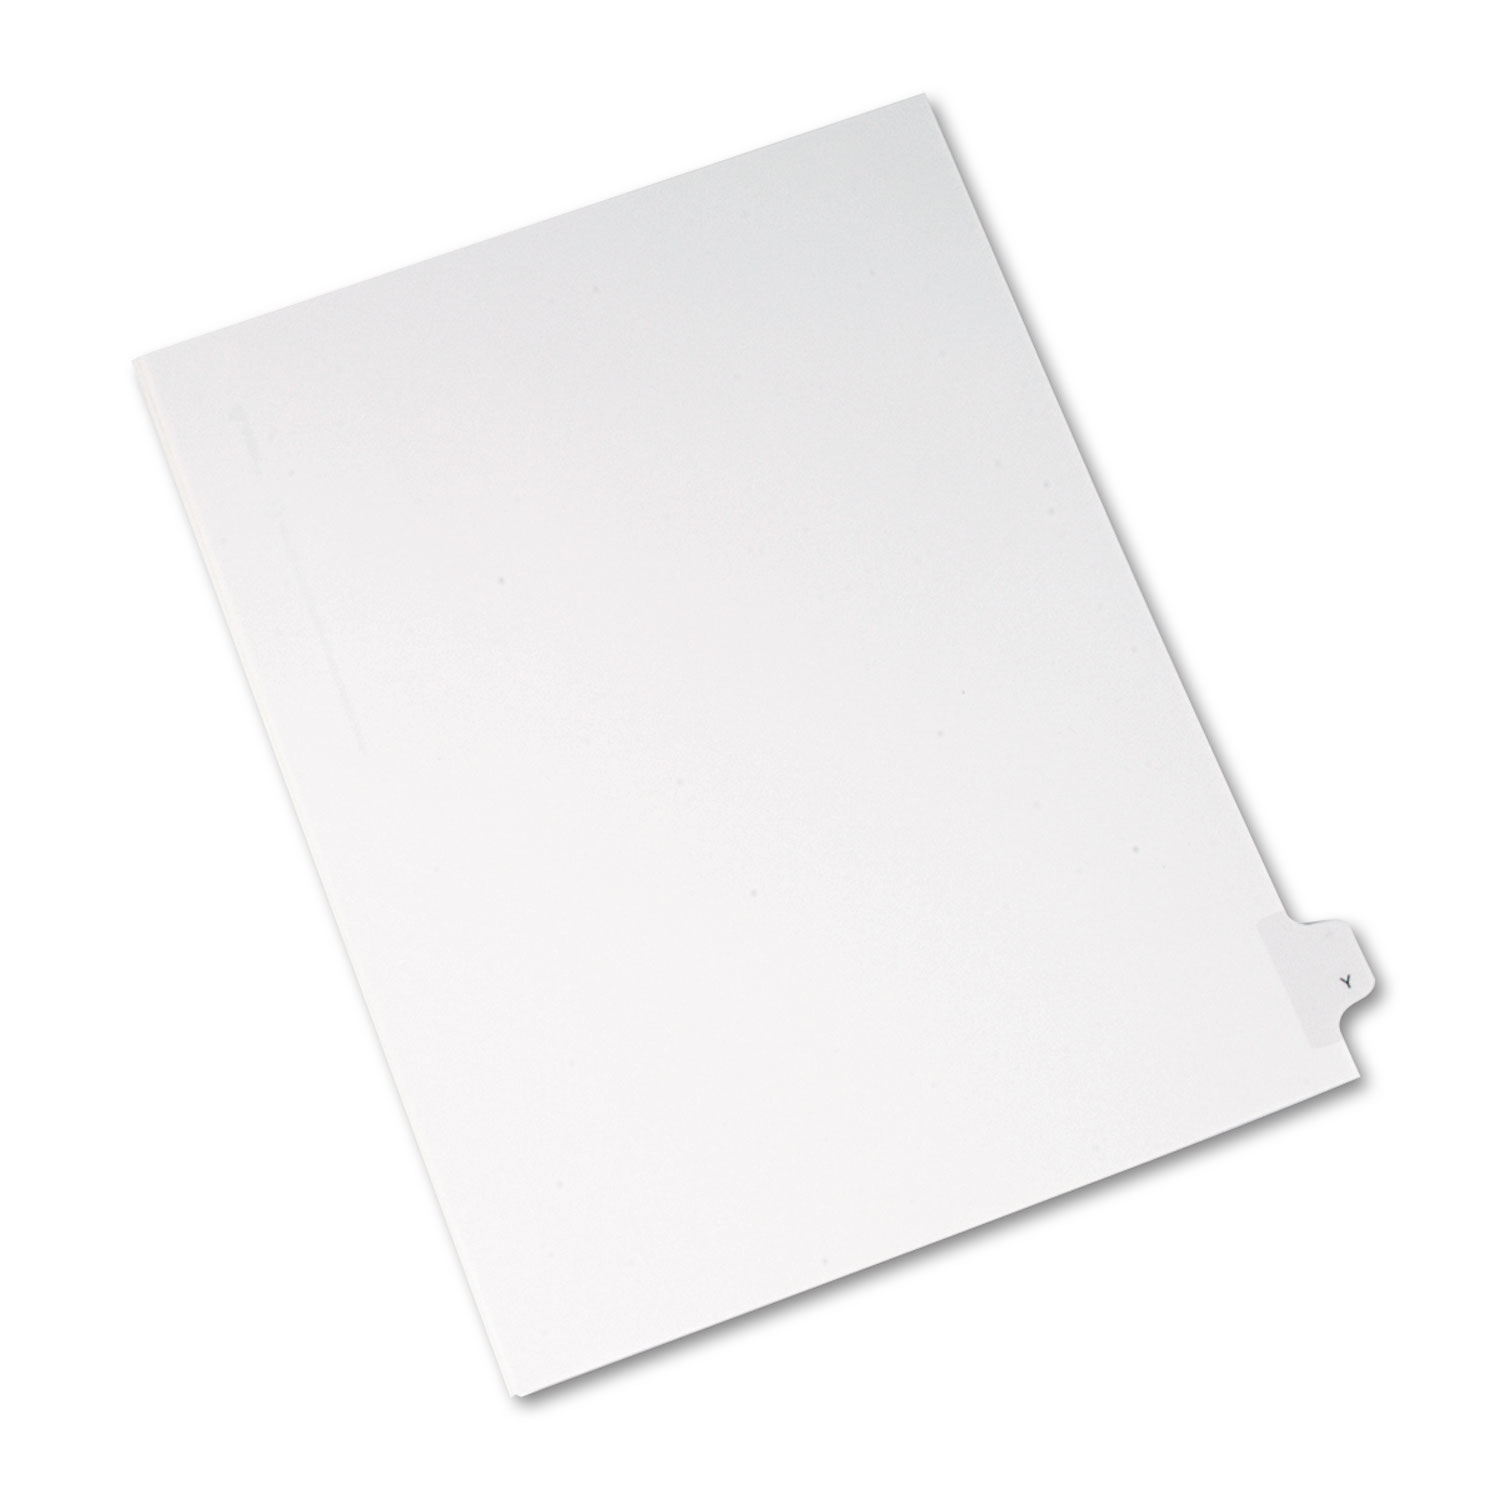 Avery AVE82187  Allstate-Style Legal Exhibit Side Tab Divider, Title: Y, Letter, White, 25/Pack